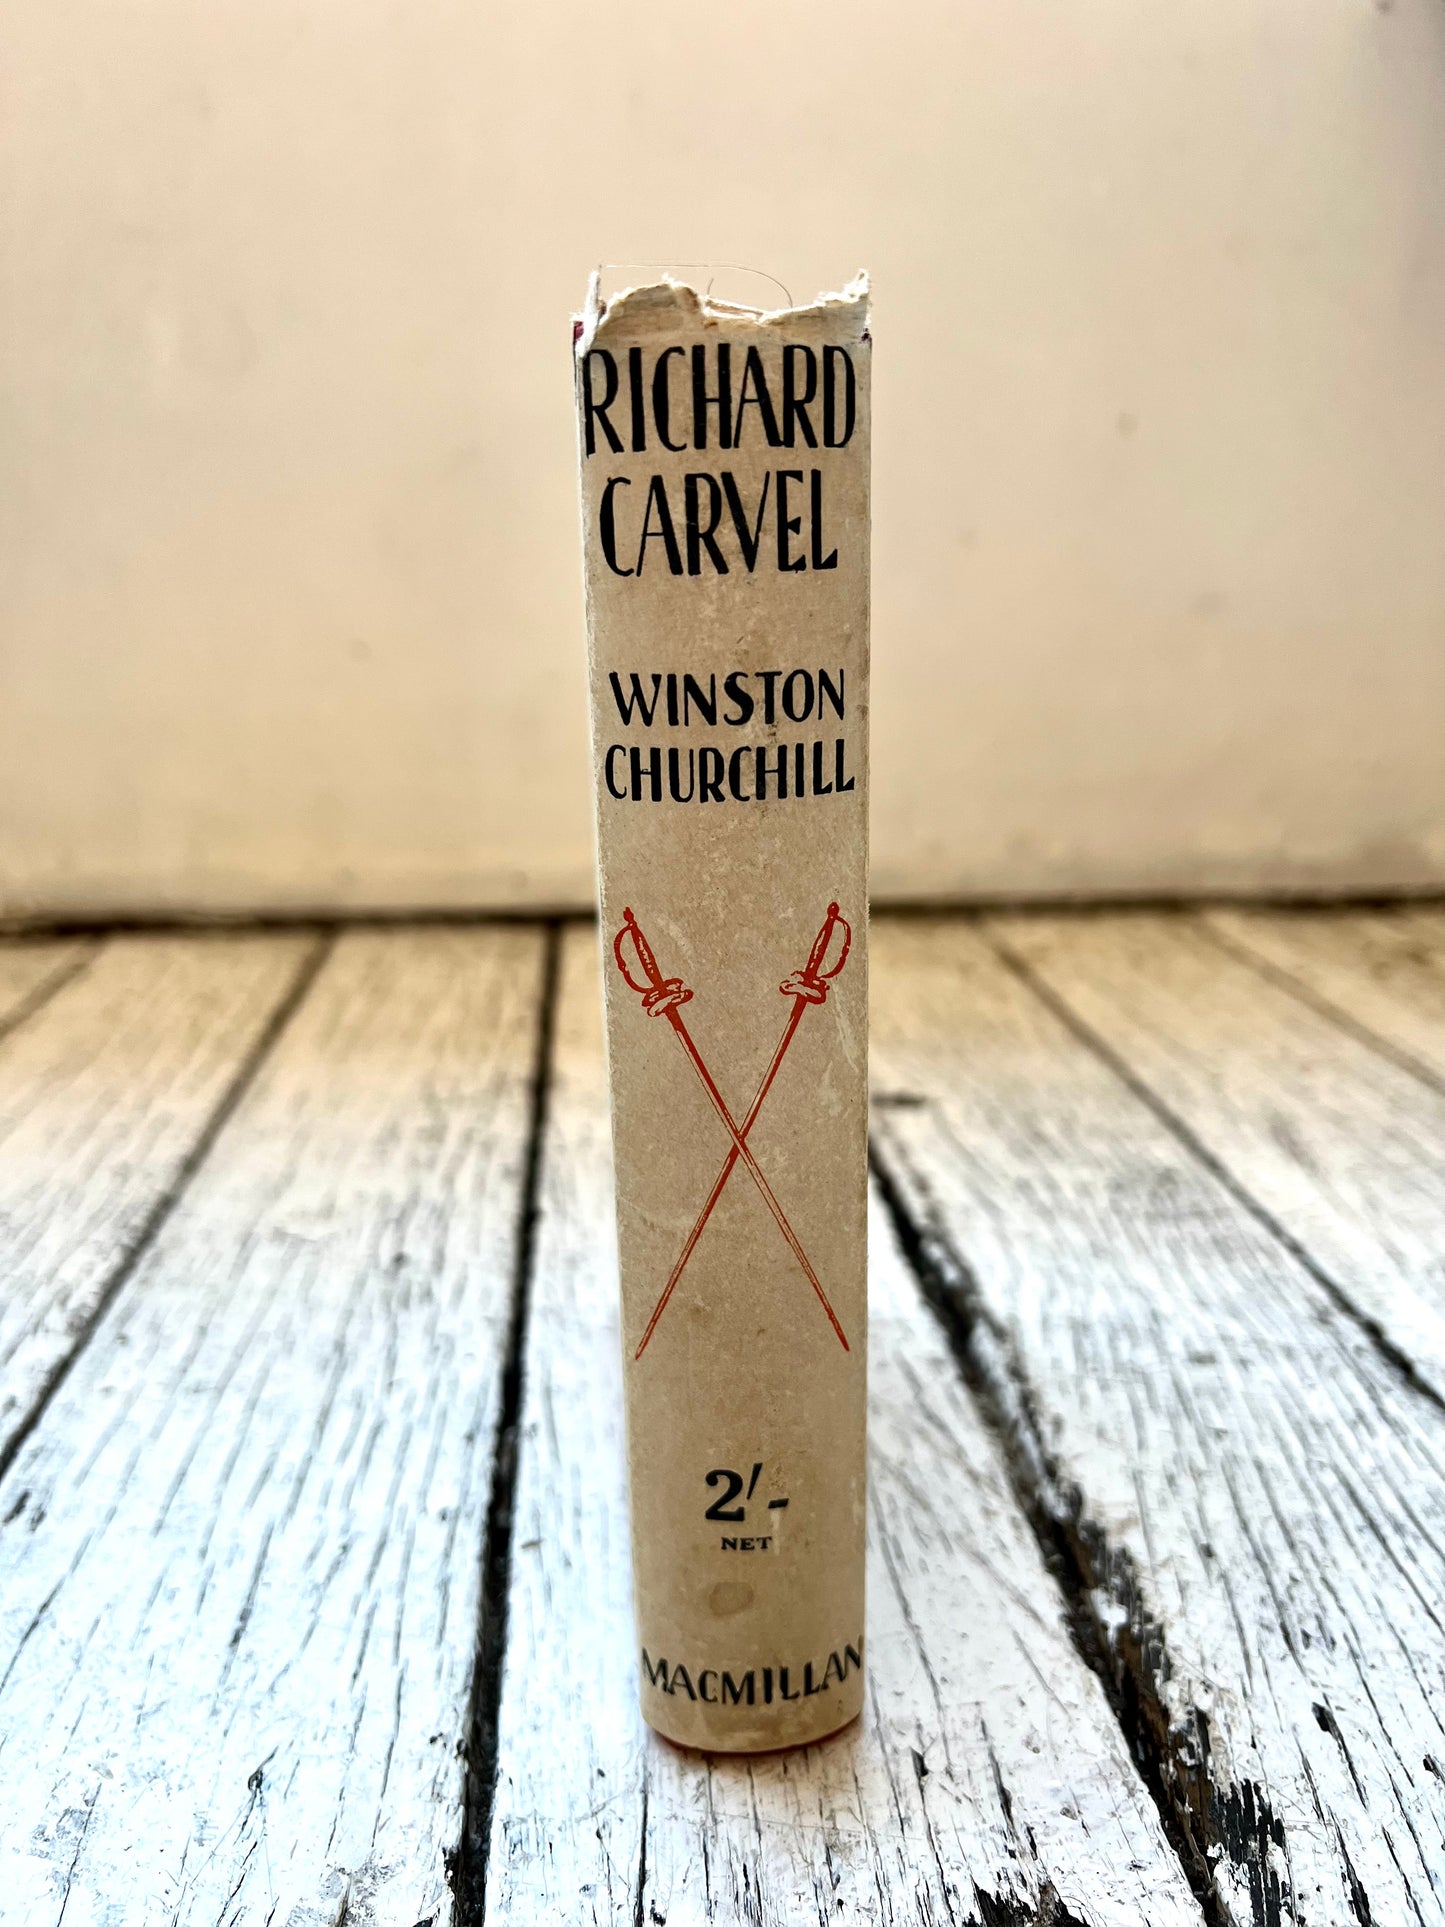 Vintage Art Deco cover “Richard Carvel” hardcover book by Winston Churchill, 1935 edition